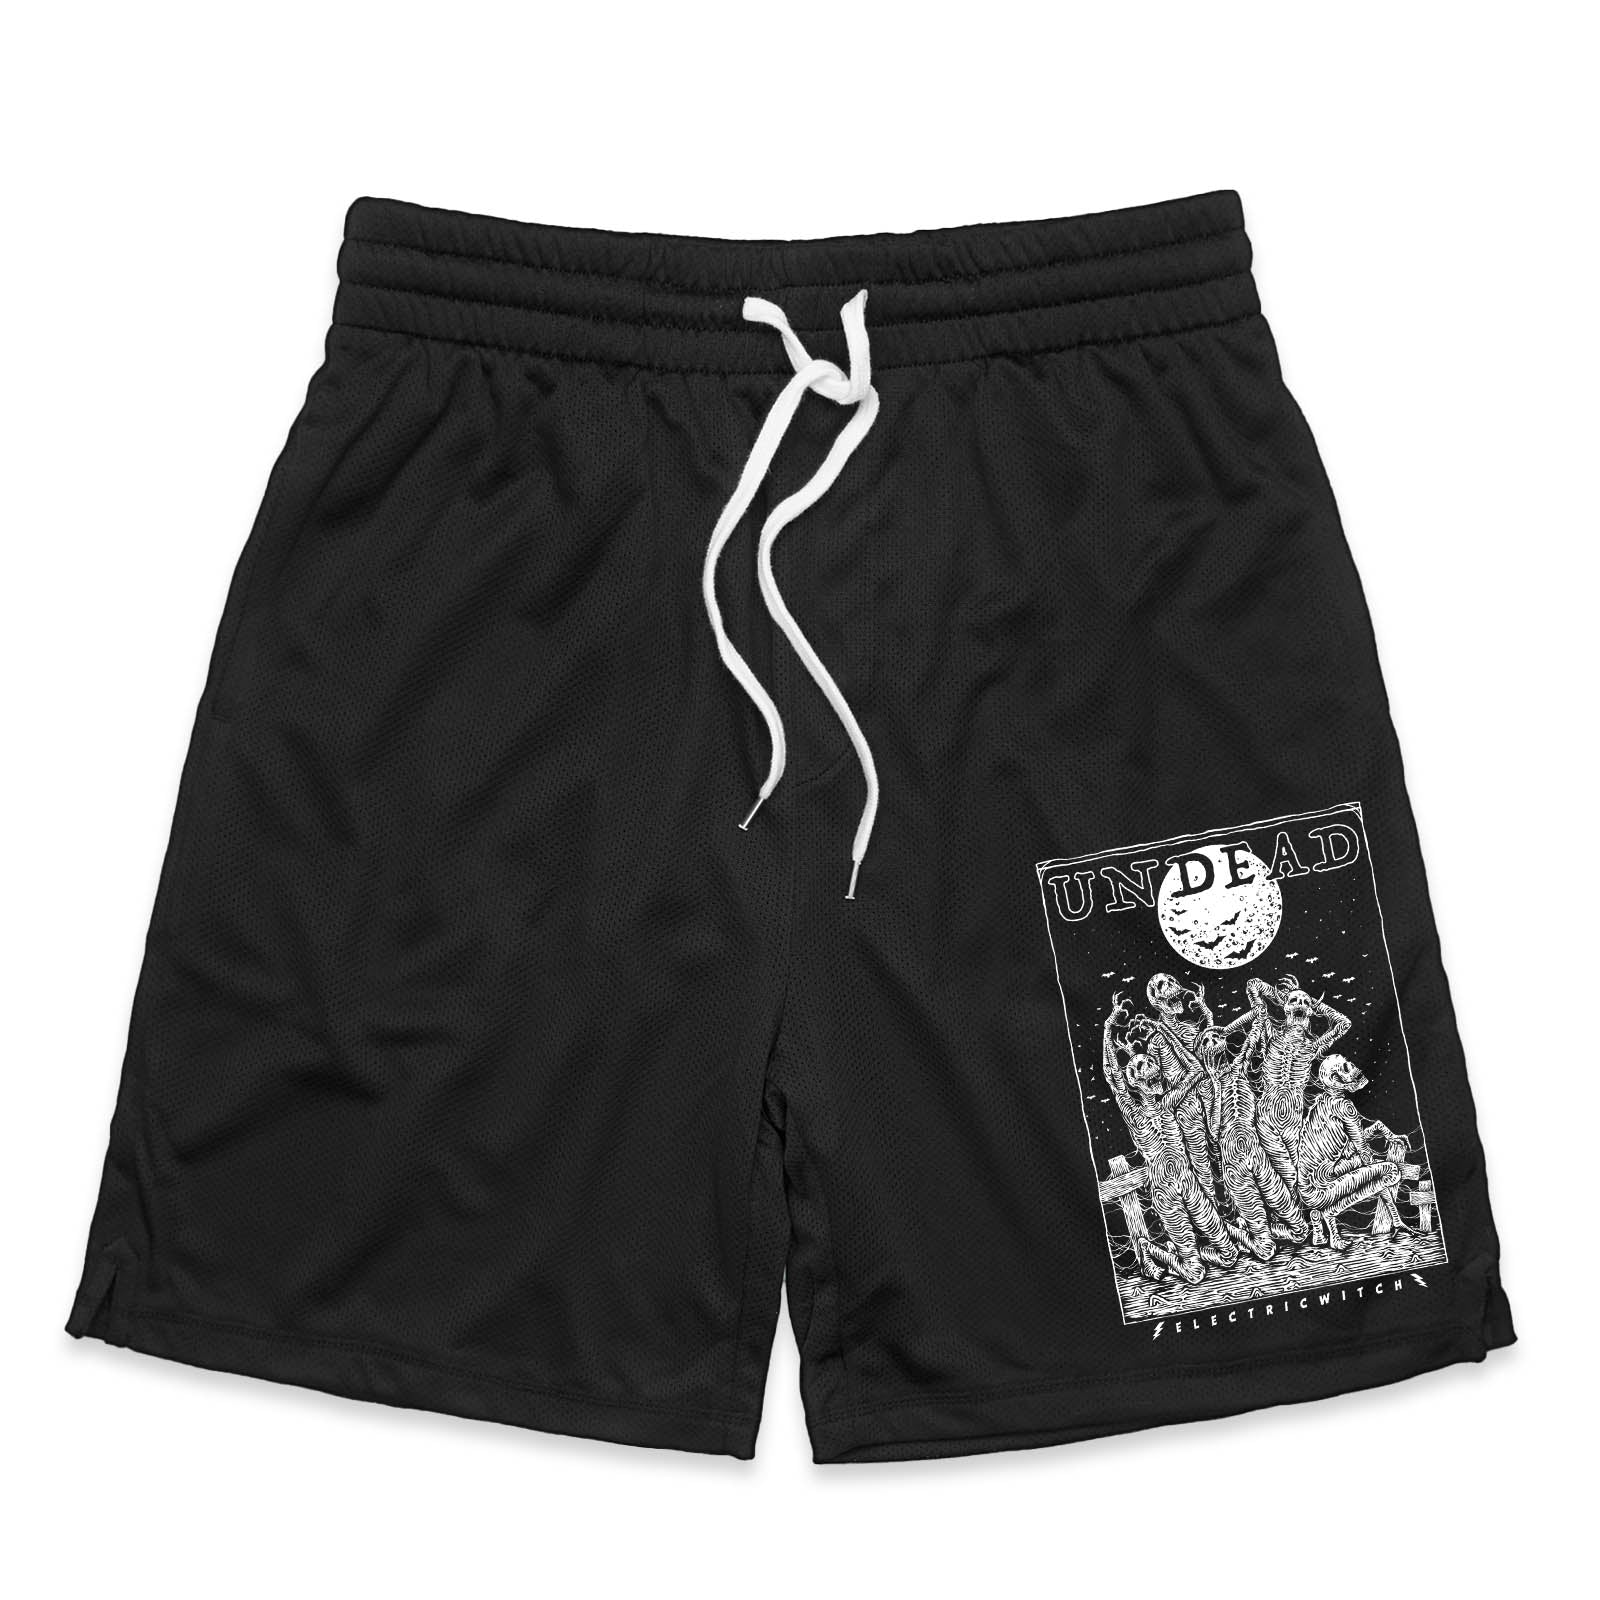 Undead Gym Shorts